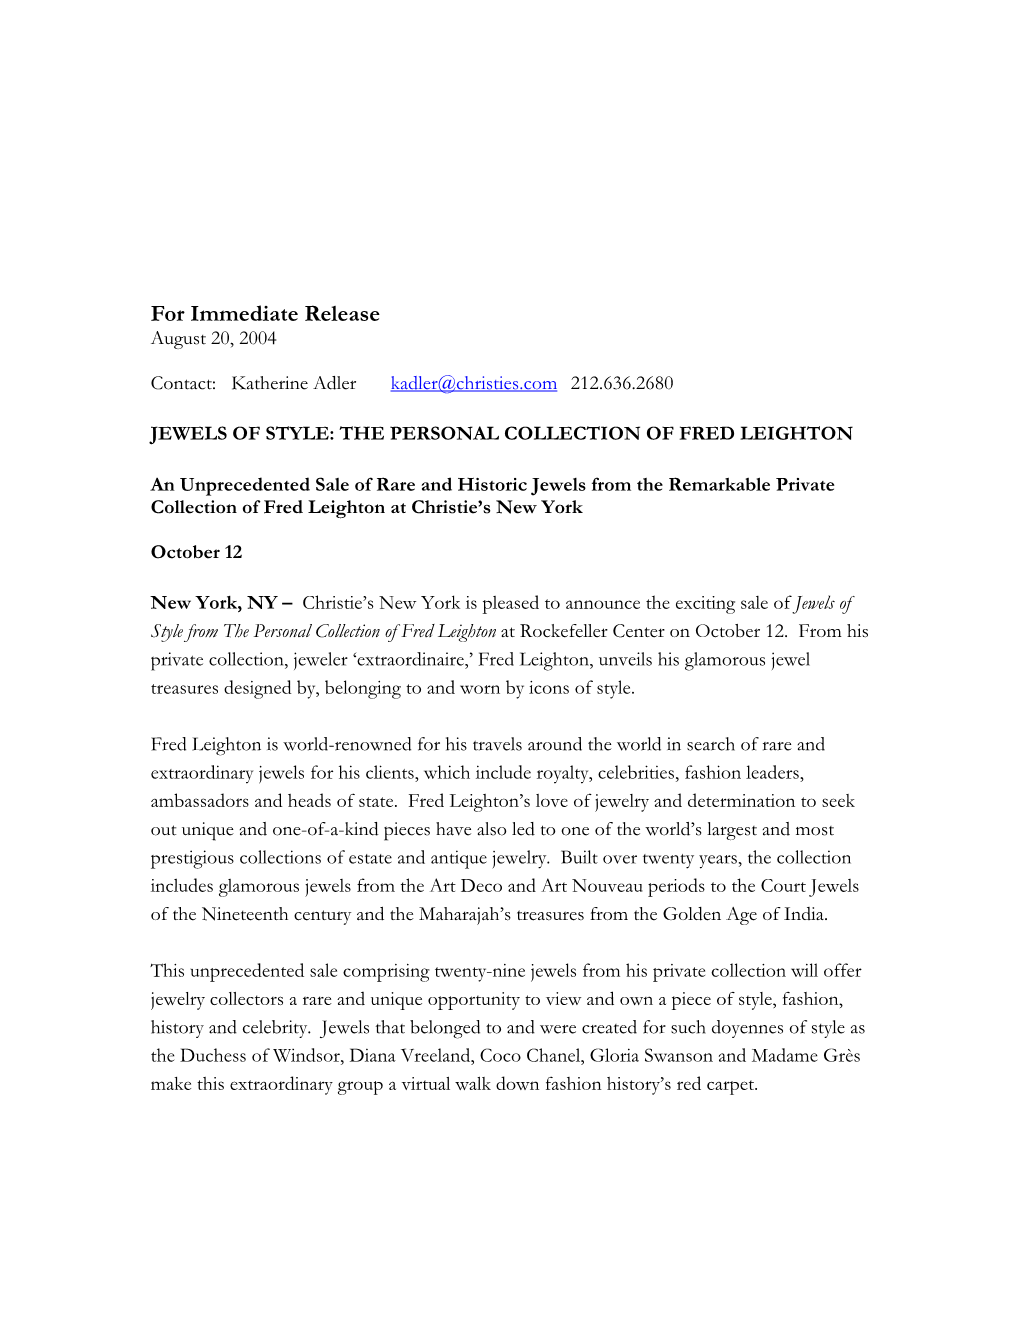 For Immediate Release August 20, 2004